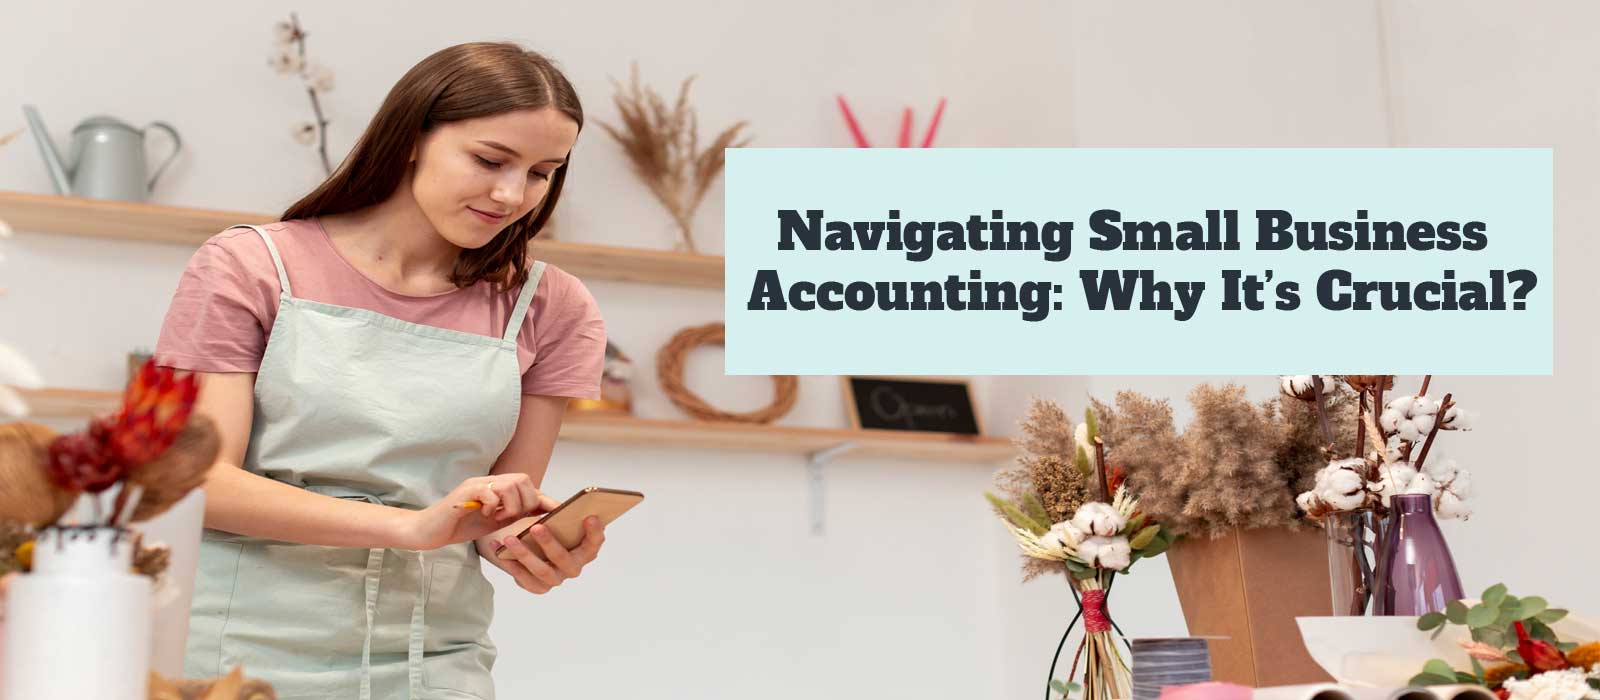 Navigating Small Business Accounting: Why It’s Crucial?